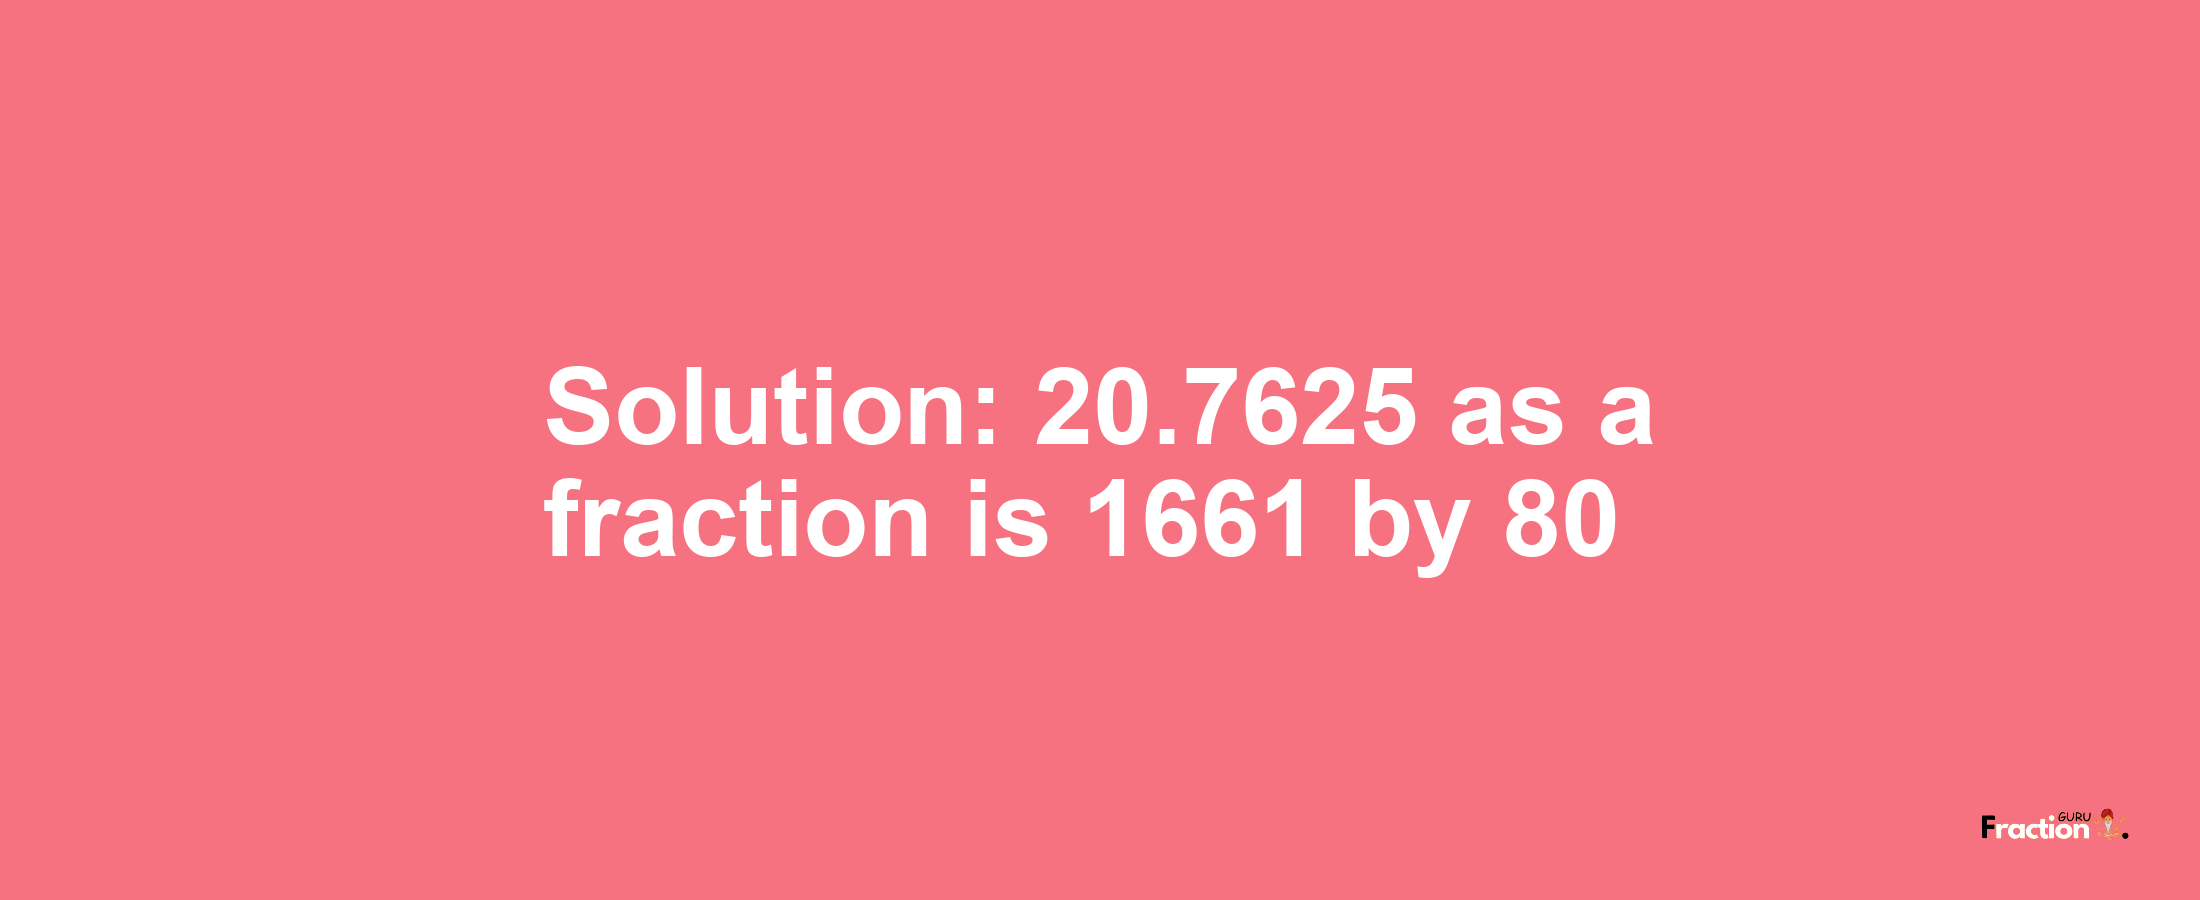 Solution:20.7625 as a fraction is 1661/80